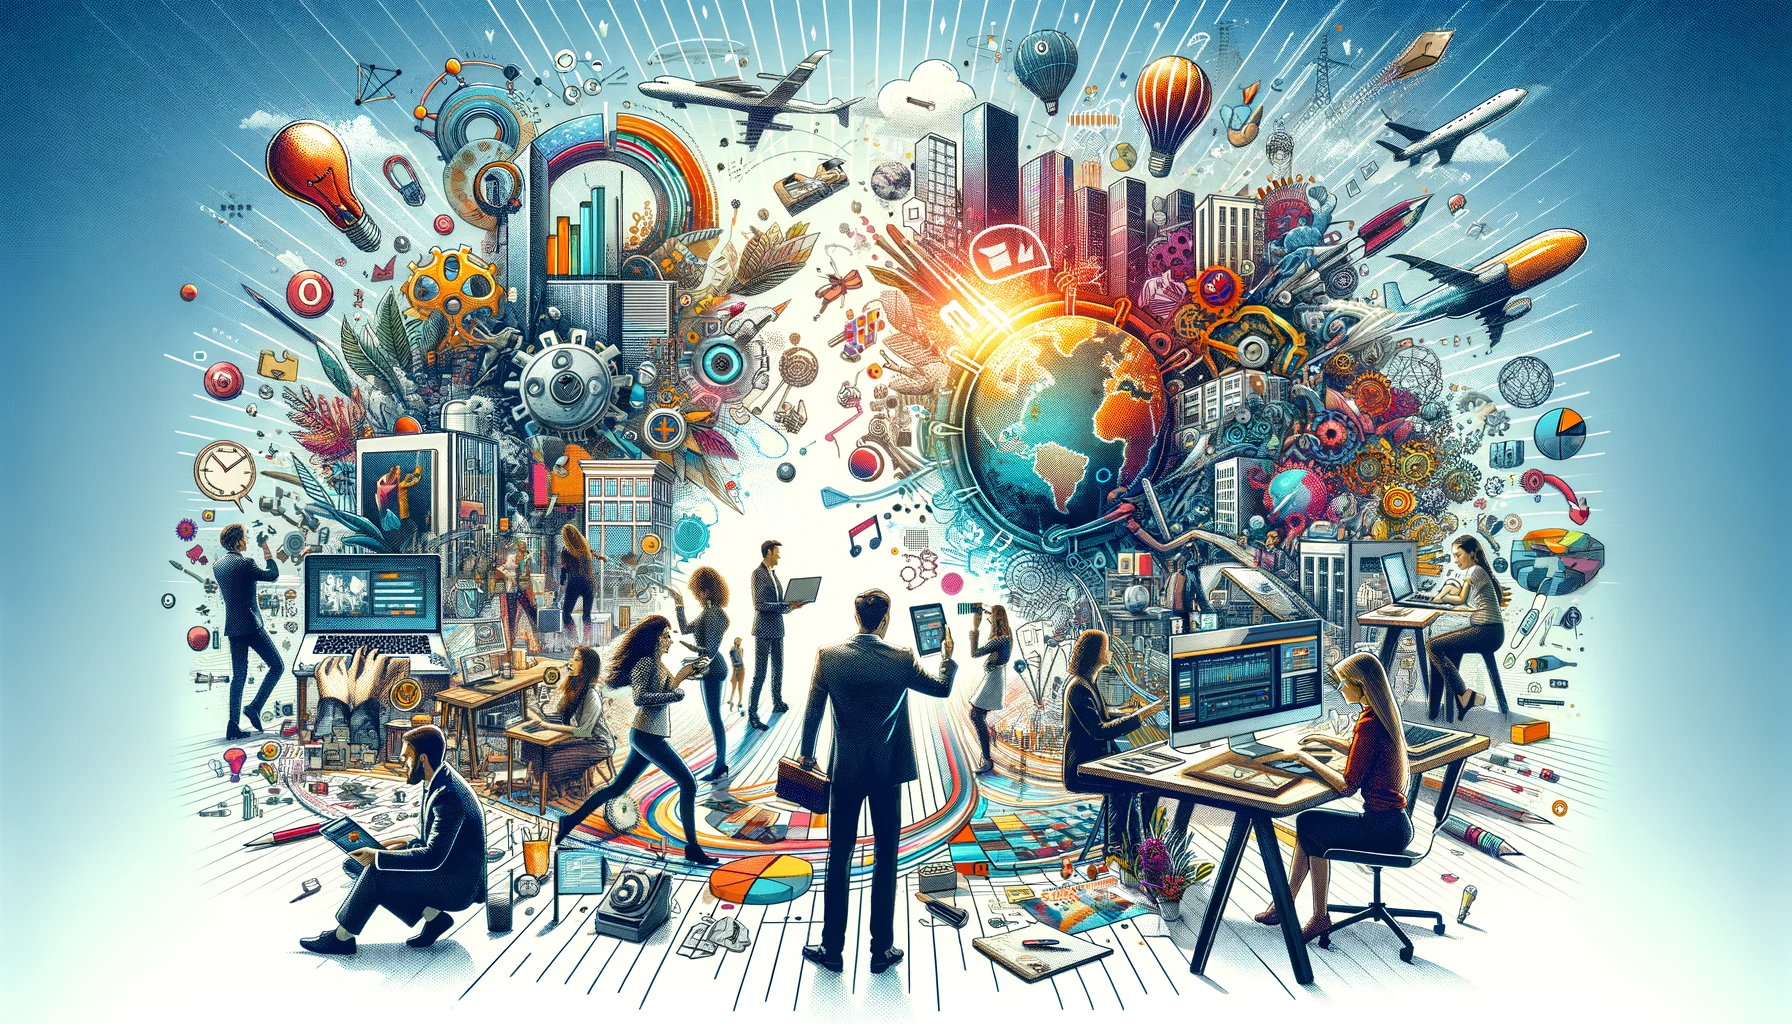 The featured image for the article, designed with a 16:9 aspect ratio and without any words, is ready and available for use. This image visually represents the diverse and dynamic nature of business ideas for 2024, appealing to aspiring entrepreneurs and business professionals.